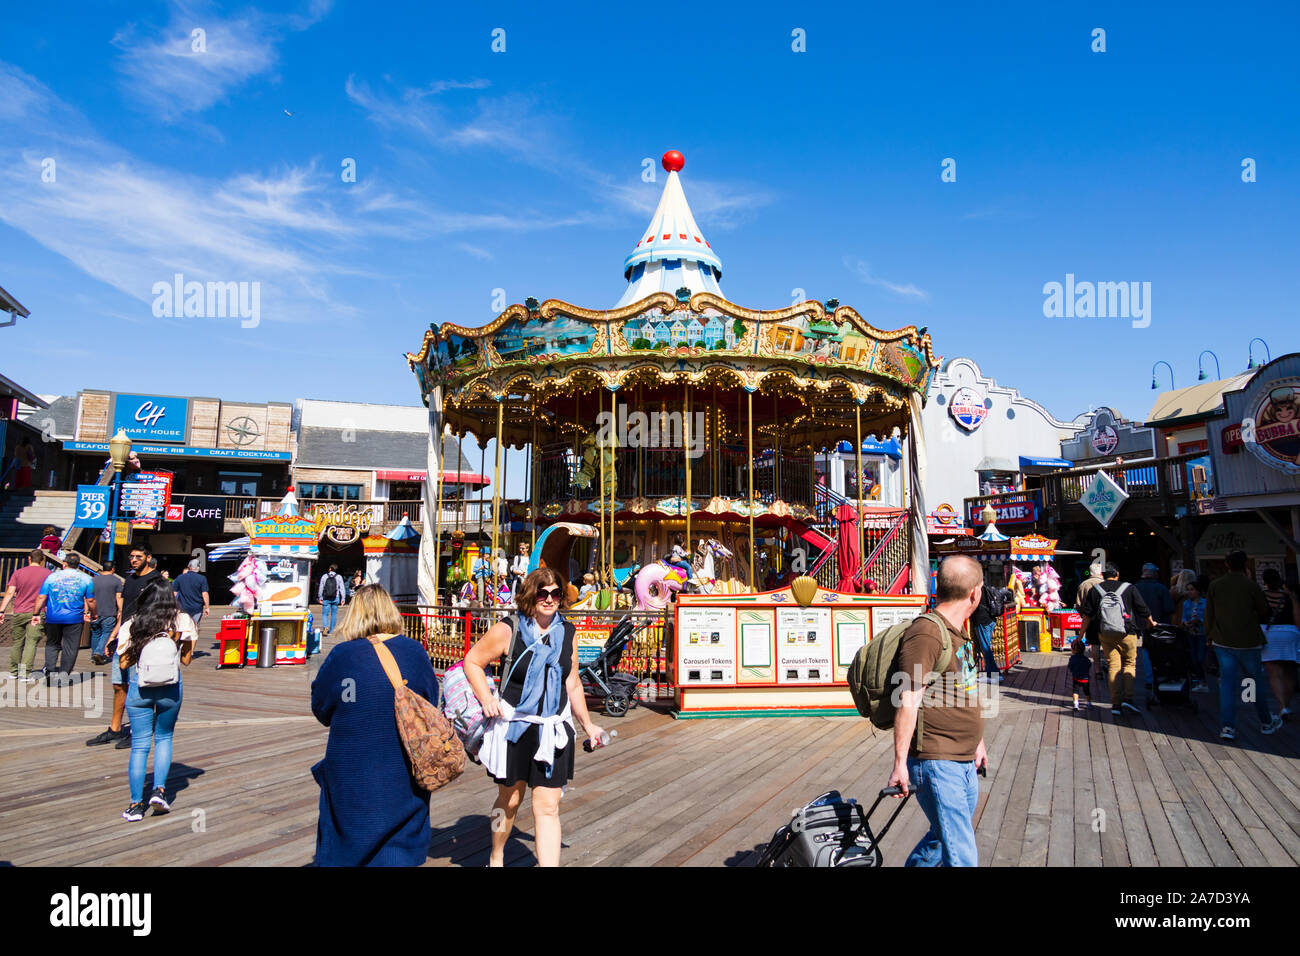 Attractions on Pier 39, Fishermans wharf, San Francisco, California United States of America Stock Photo